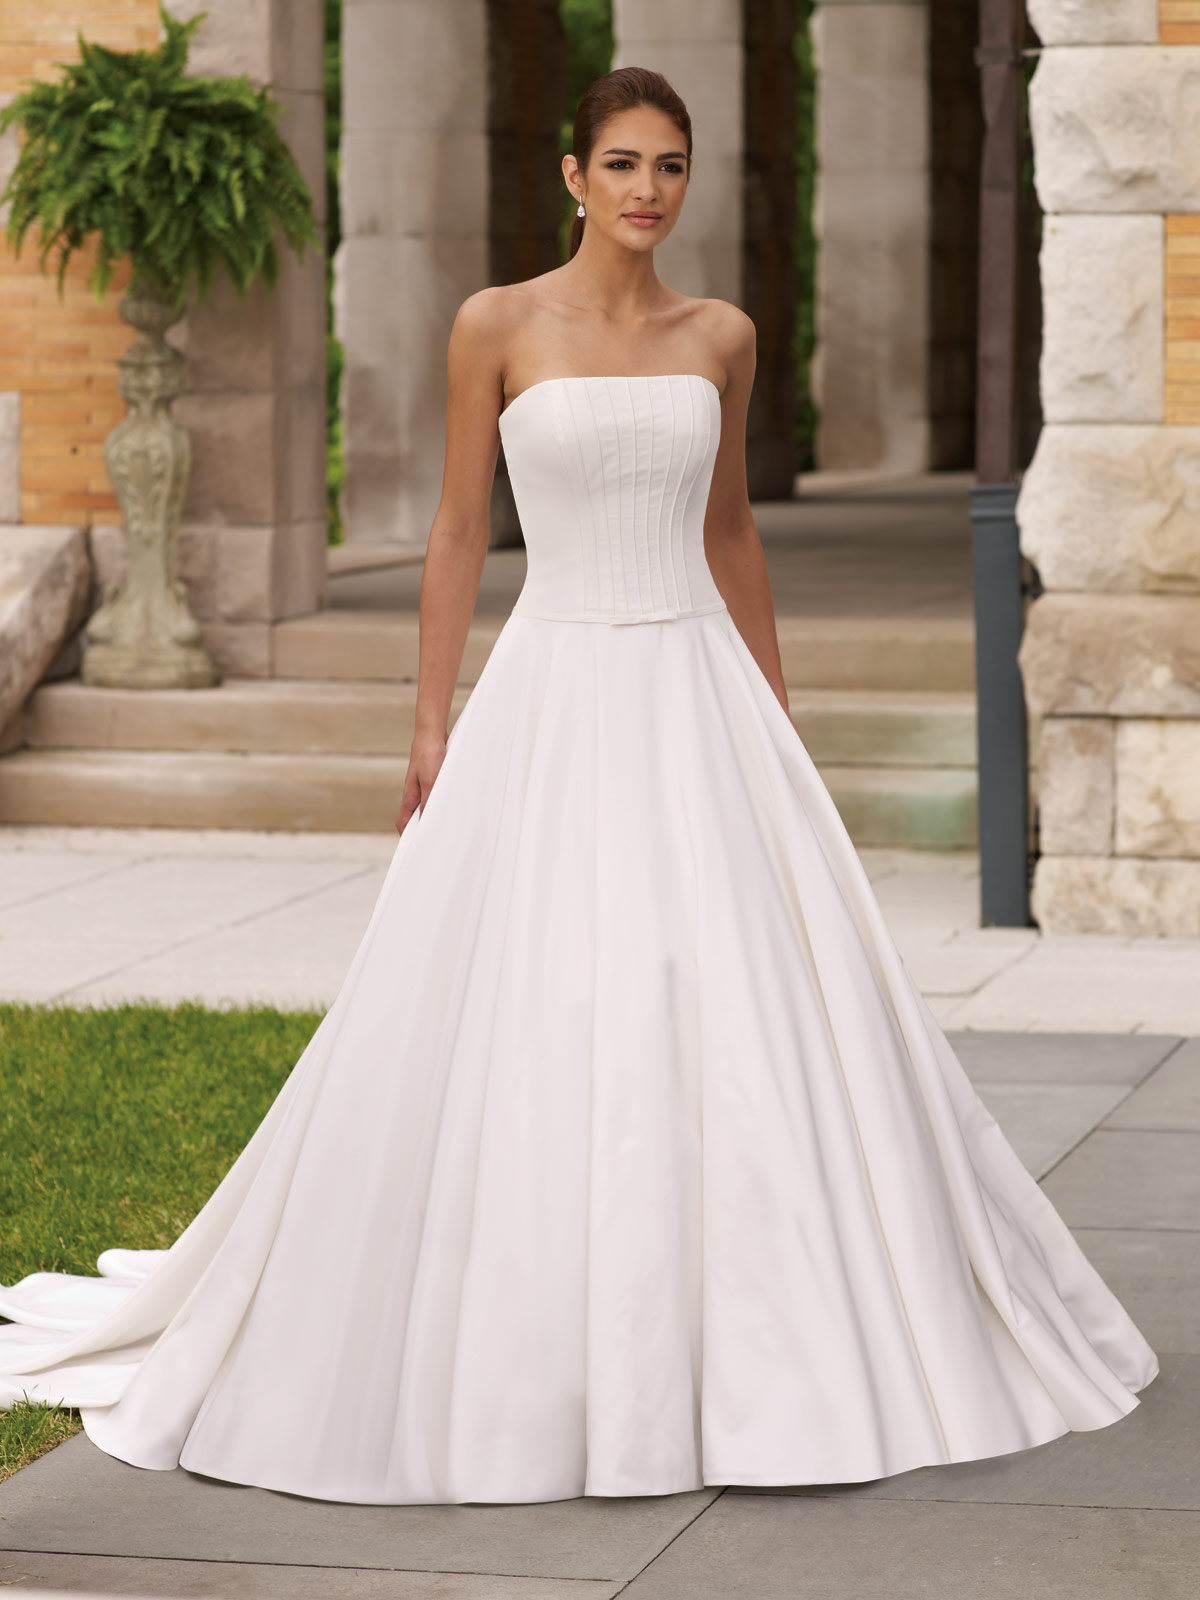 Example Formal Photos Design Choices Wedding Gowns:the wedding dress